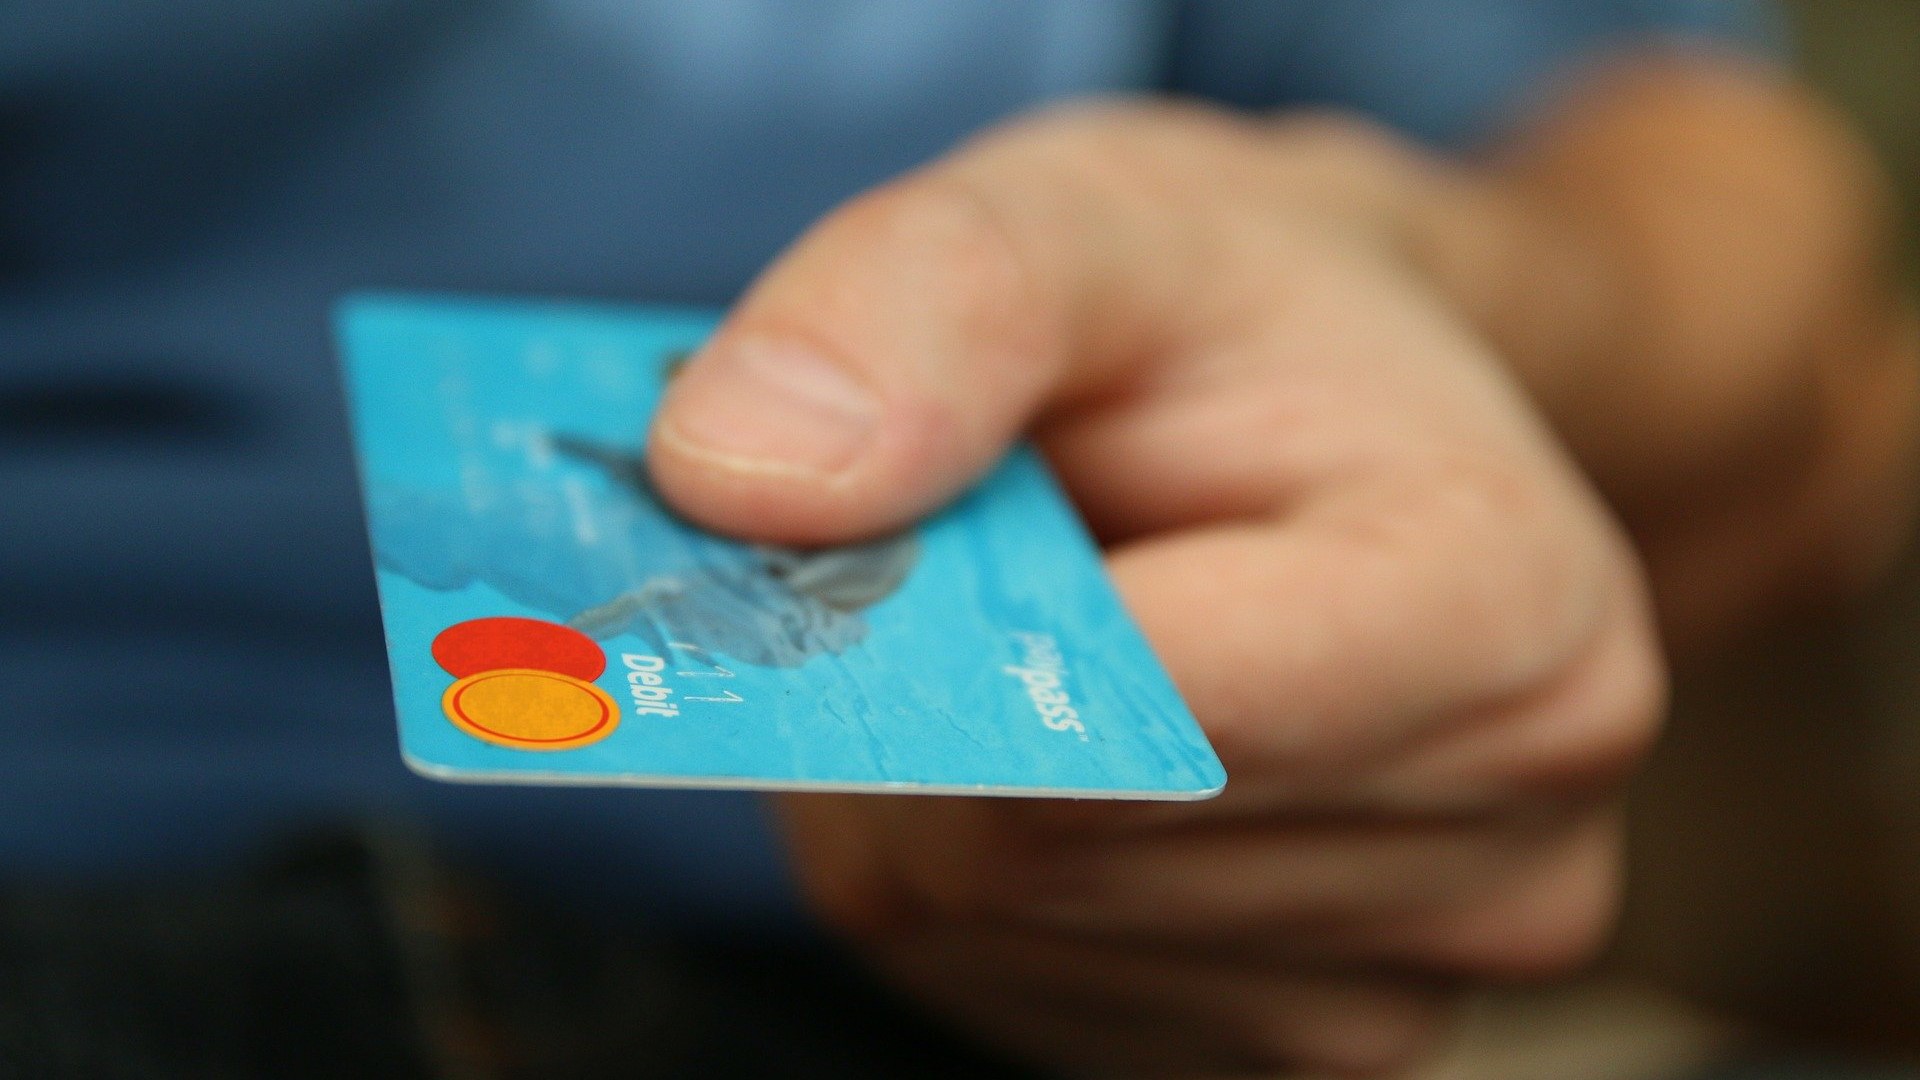 Americans have increased credit card spending by nearly 20% in the last 12 months, but delinquencies are also up 20%. Should we avoid plastic? Mark weighs in.